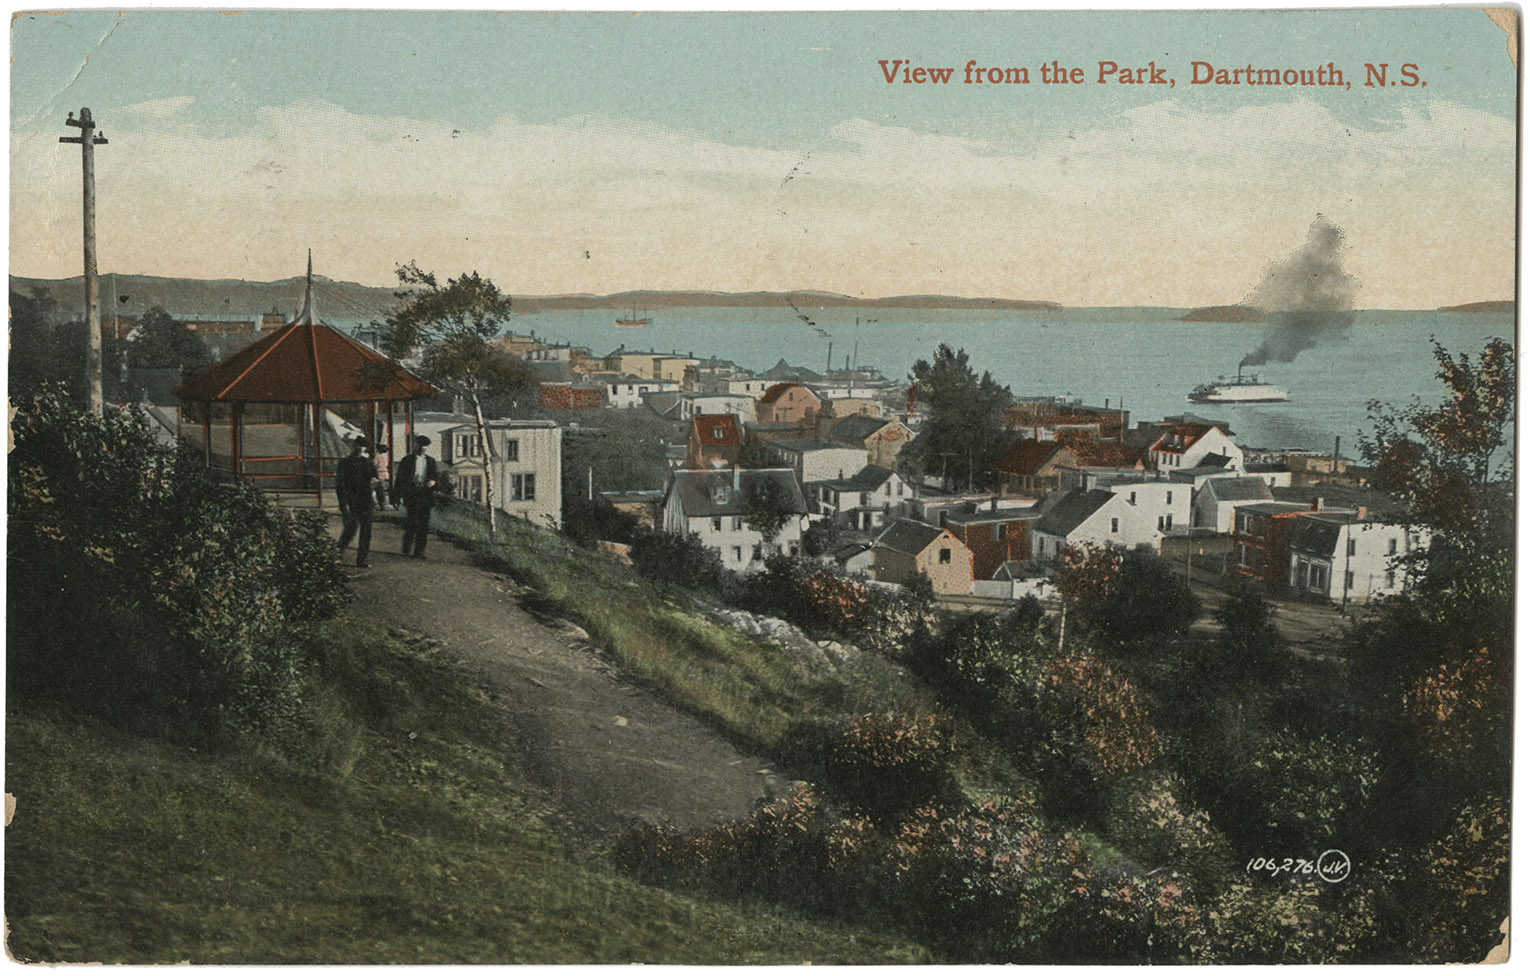 communityalbums - View from the Park, Dartmouth, N.S.